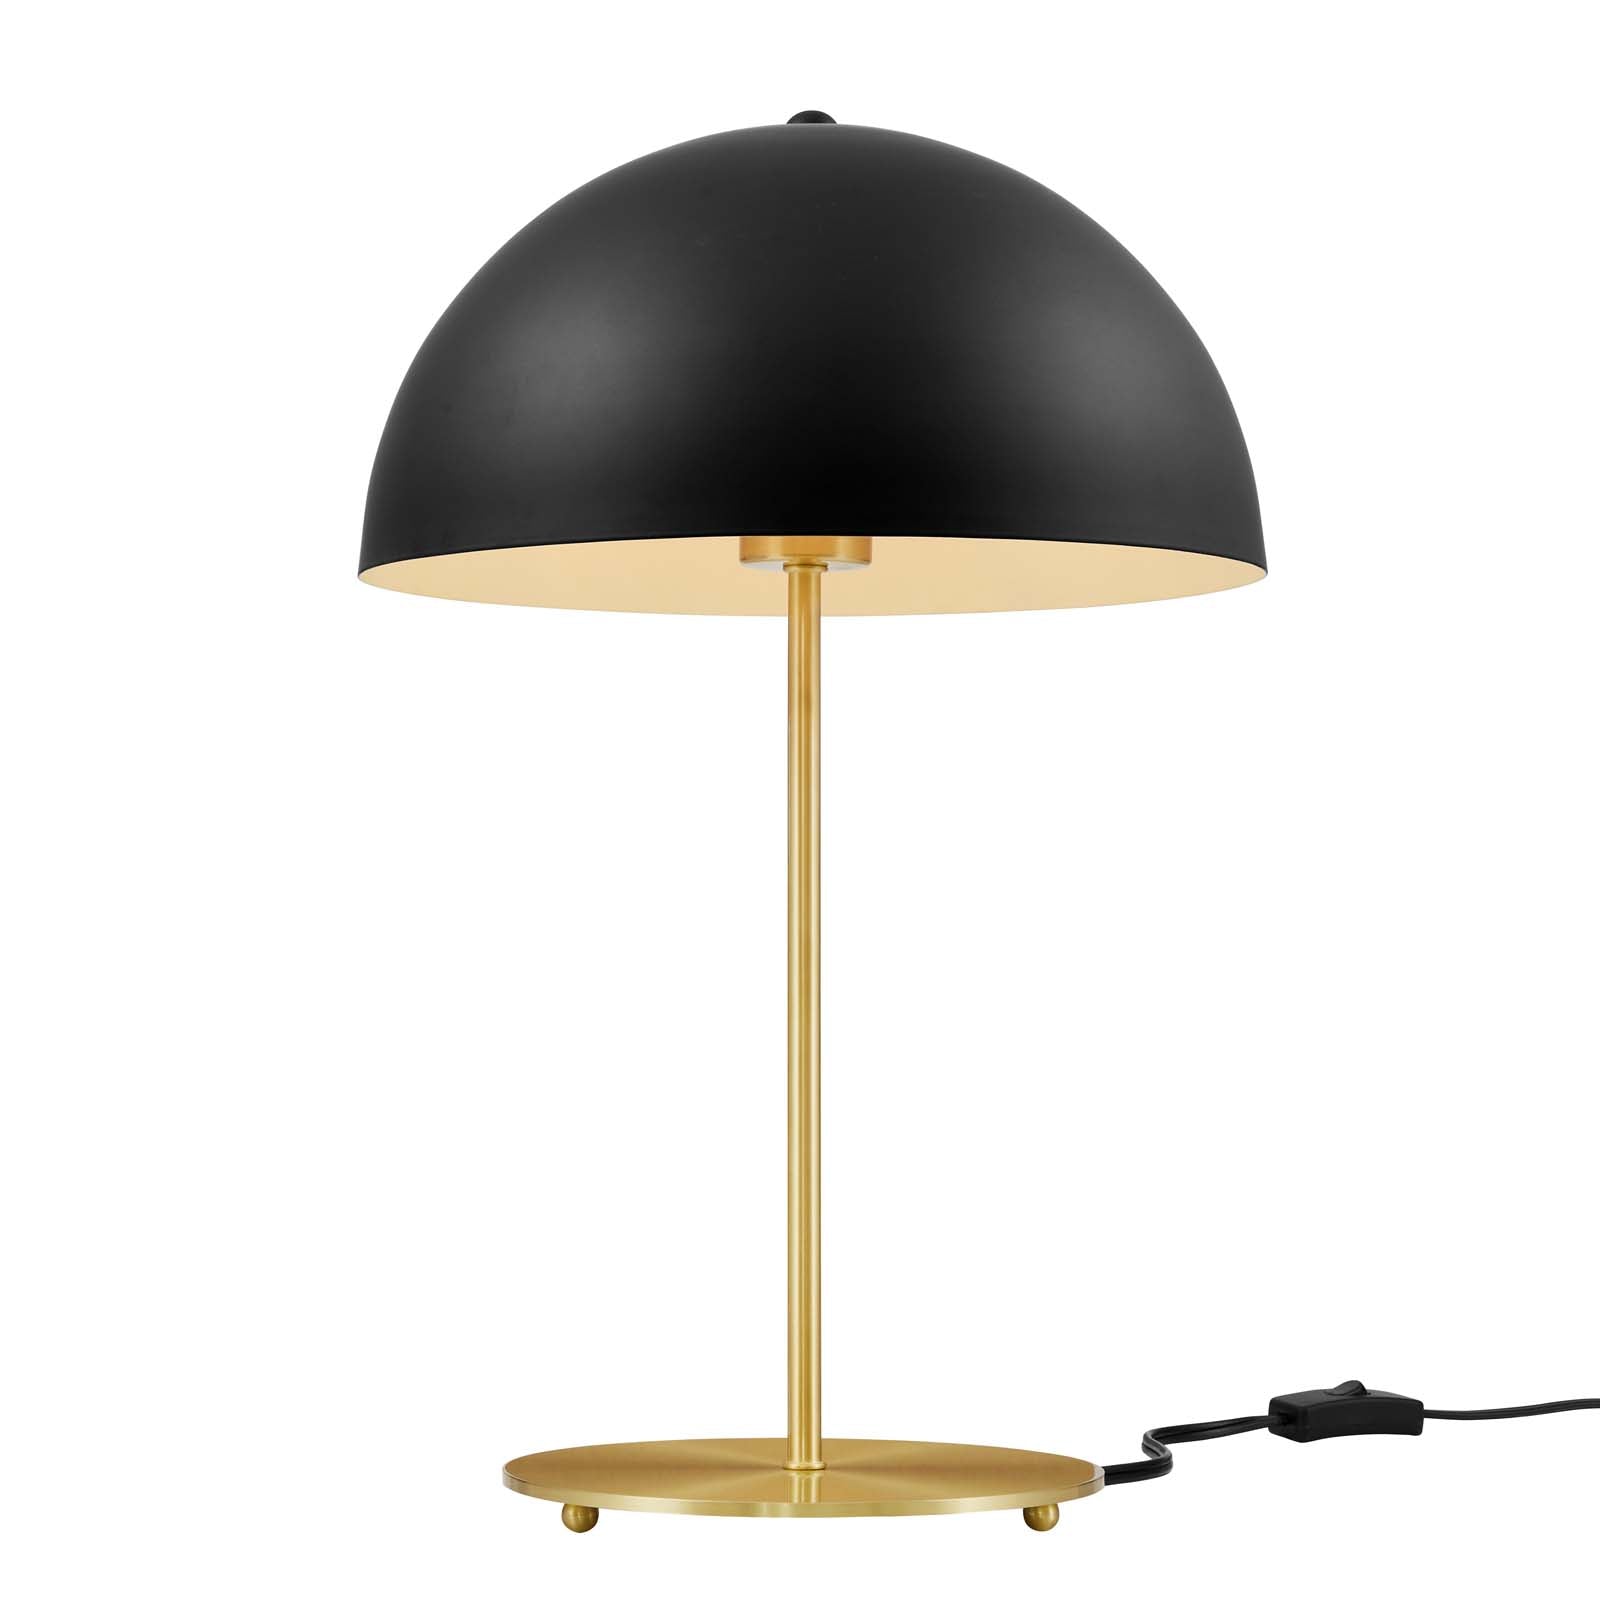 Modway Table Lamps - Ideal Metal Table Lamp Black Satin Brass